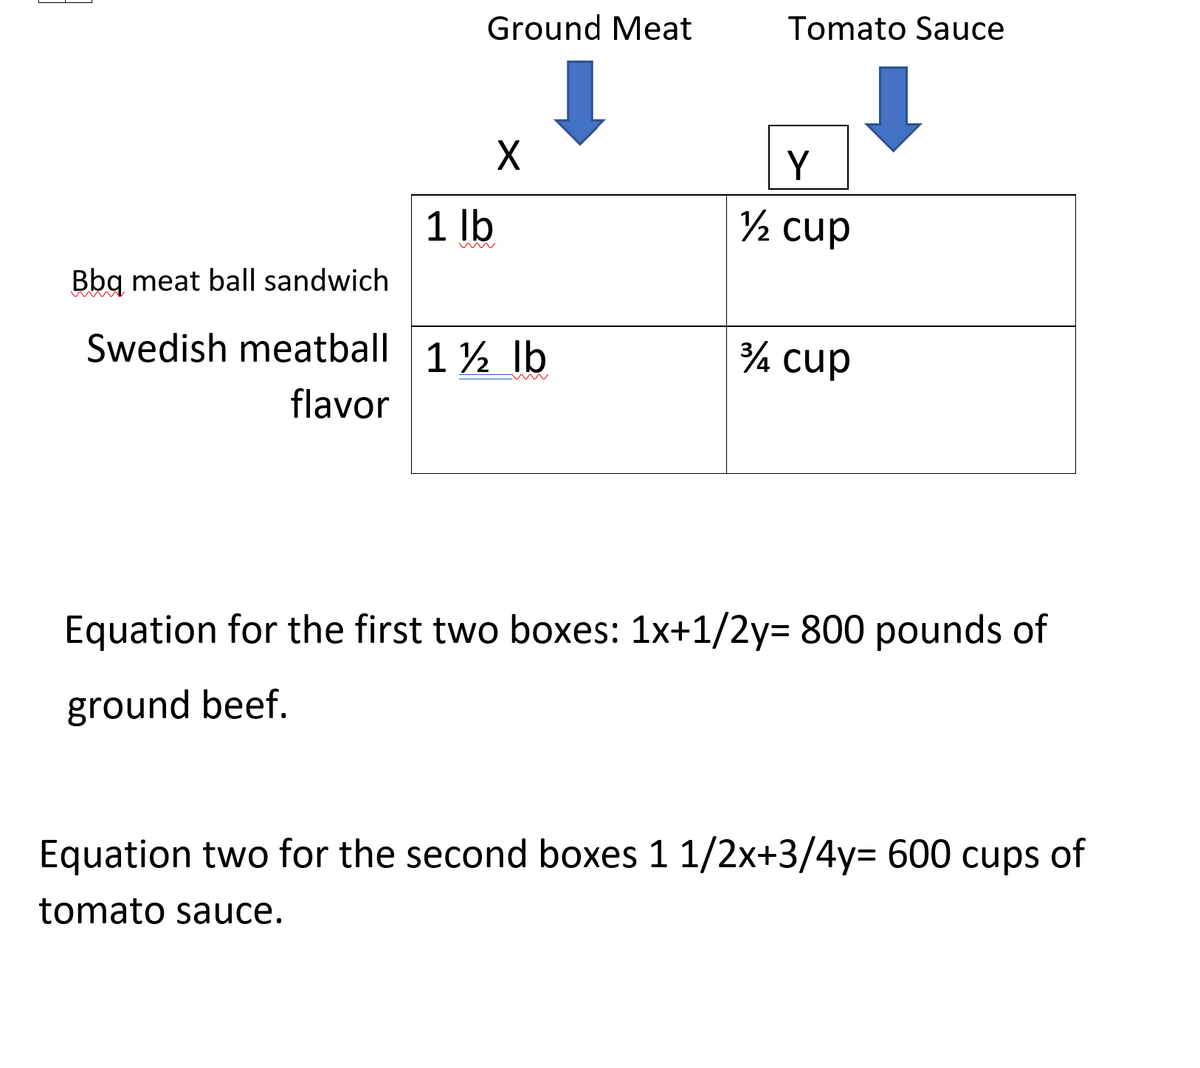 Ground Meat
Tomato Sauce
Y
1 lb
2 cup
Bbq meat ball sandwich
Swedish meatball 1 ½ Ib
4 cup
flavor
Equation for the first two boxes: 1x+1/2y= 800 pounds of
ground beef.
Equation two for the second boxes 1 1/2x+3/4y= 600 cups of
tomato sauce.
